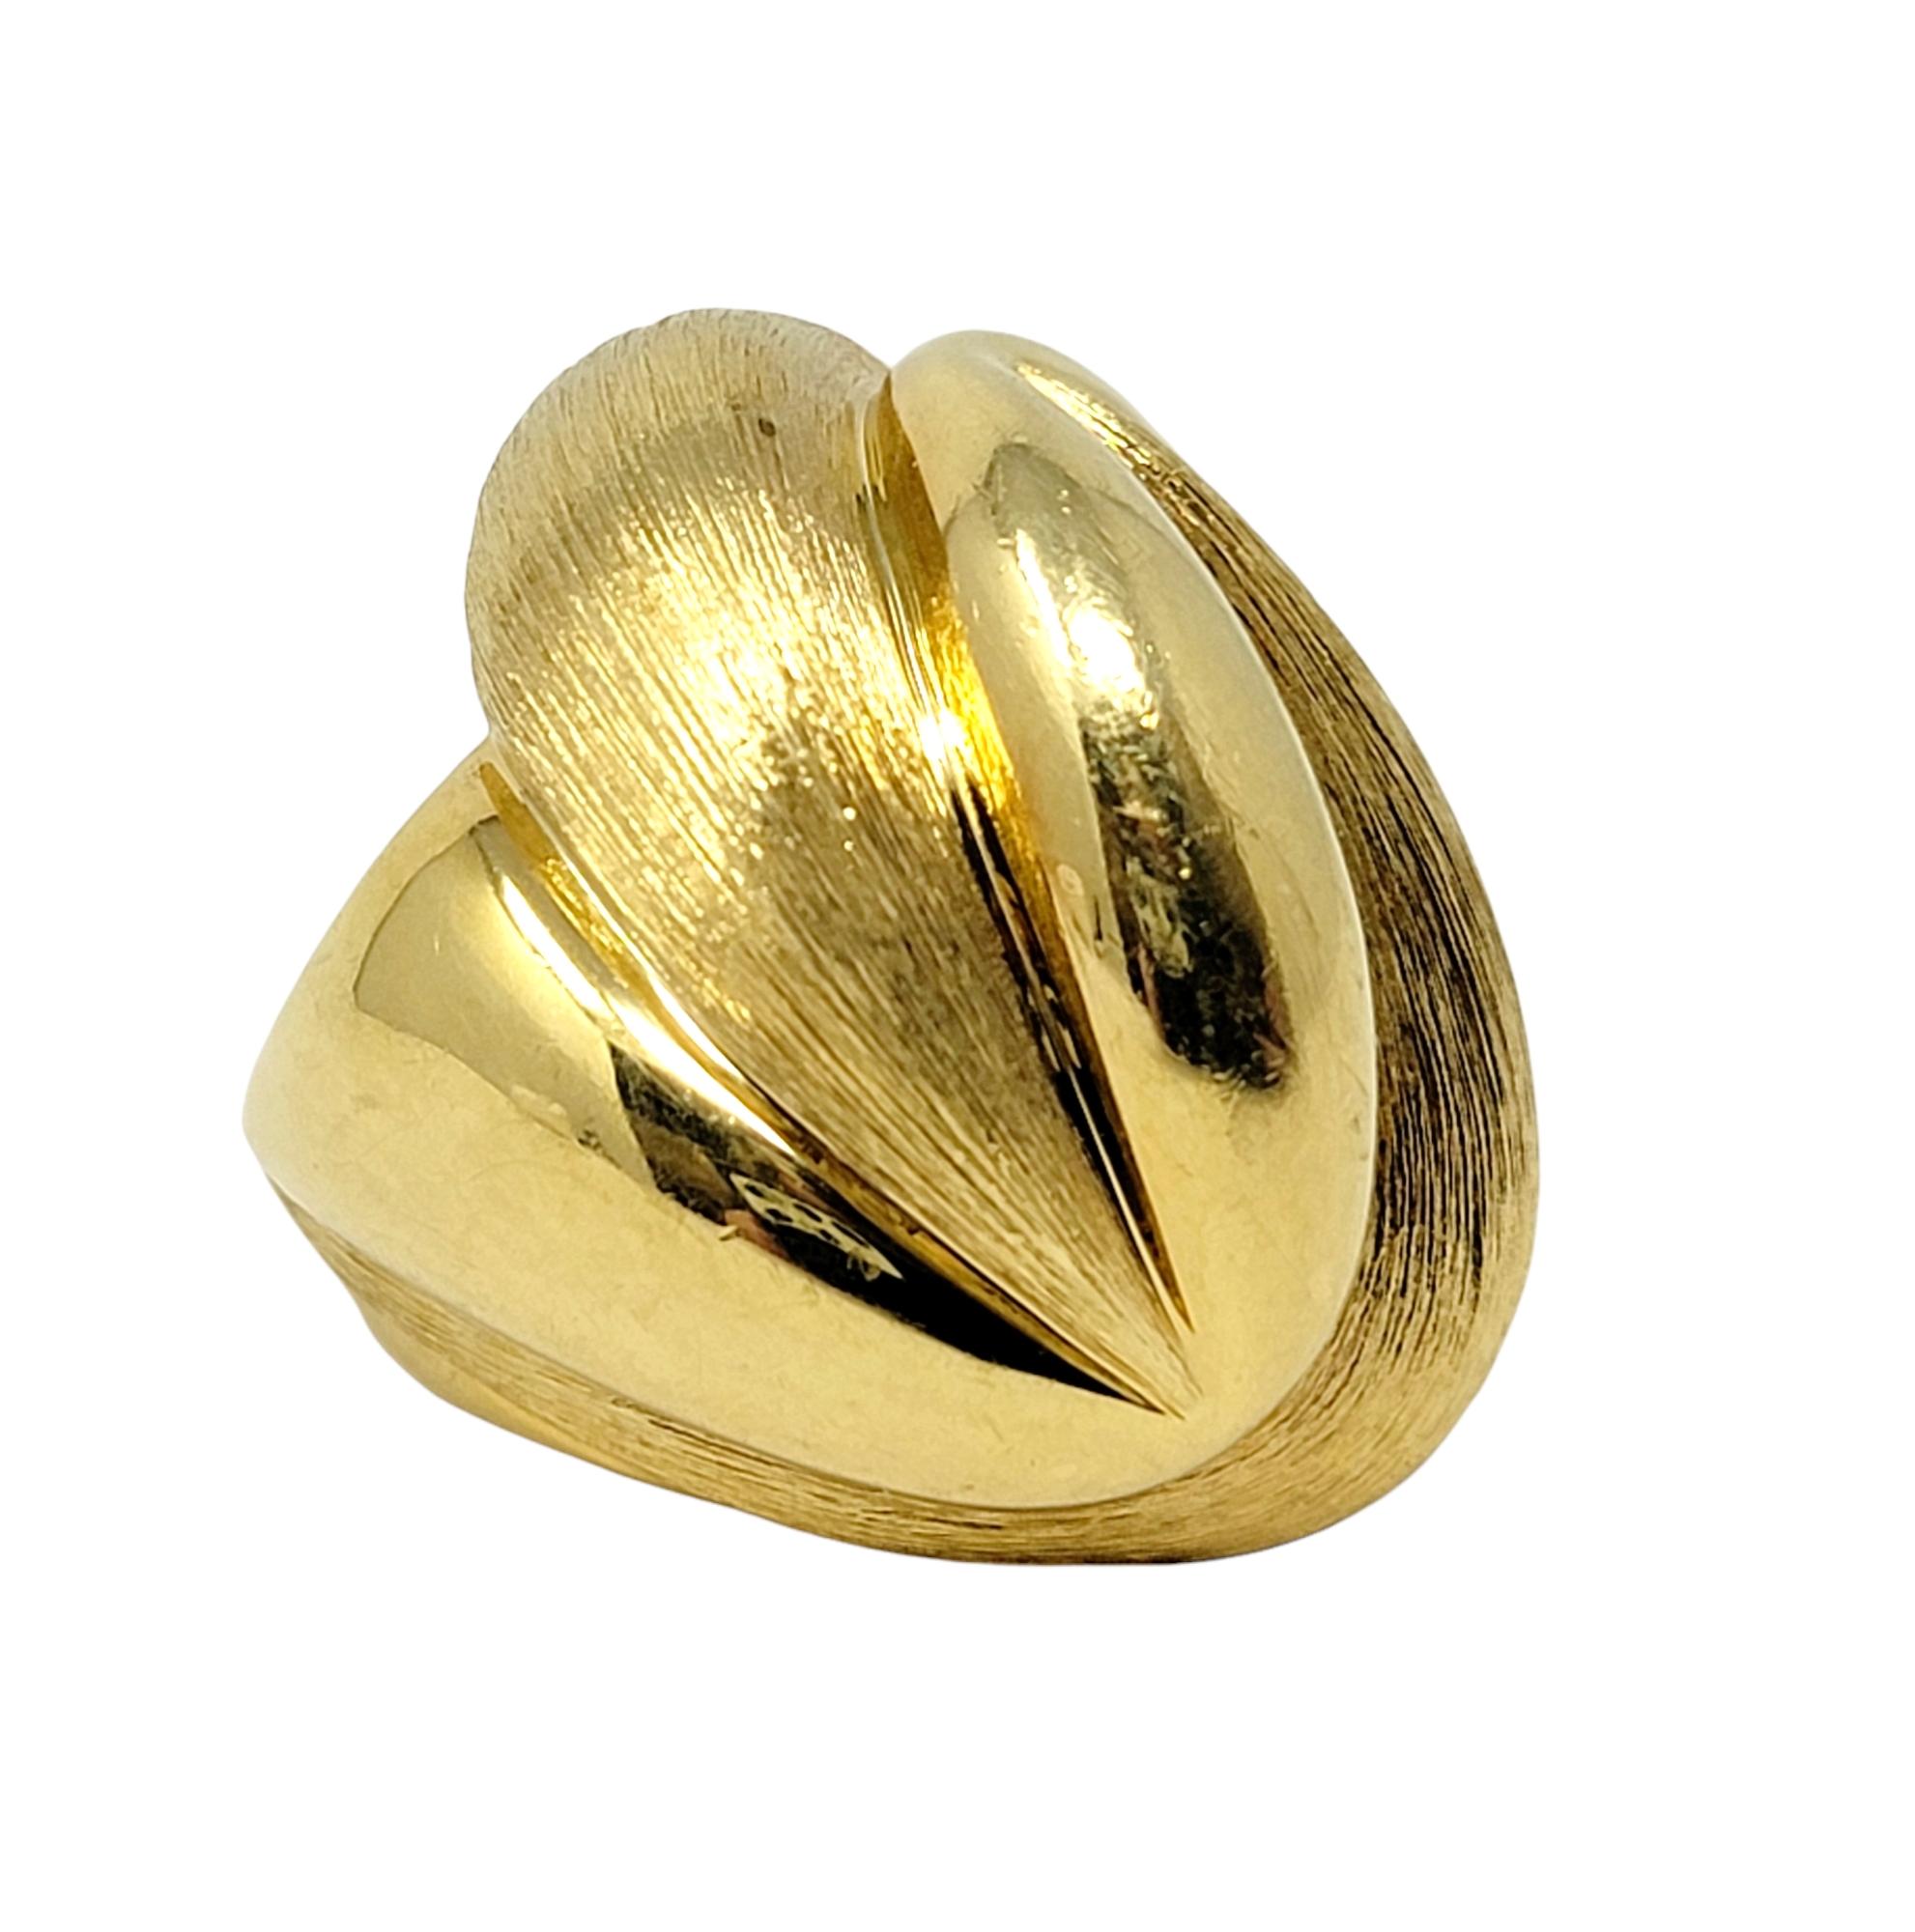 Ring size: 6.5

Uniquely textured 18 karat yellow gold cocktail ring by American jewelry designer, Henry Dunay. Bold in both size and design, this substantial ring offers stunning sophistication without being over the top, while the sleek curves and